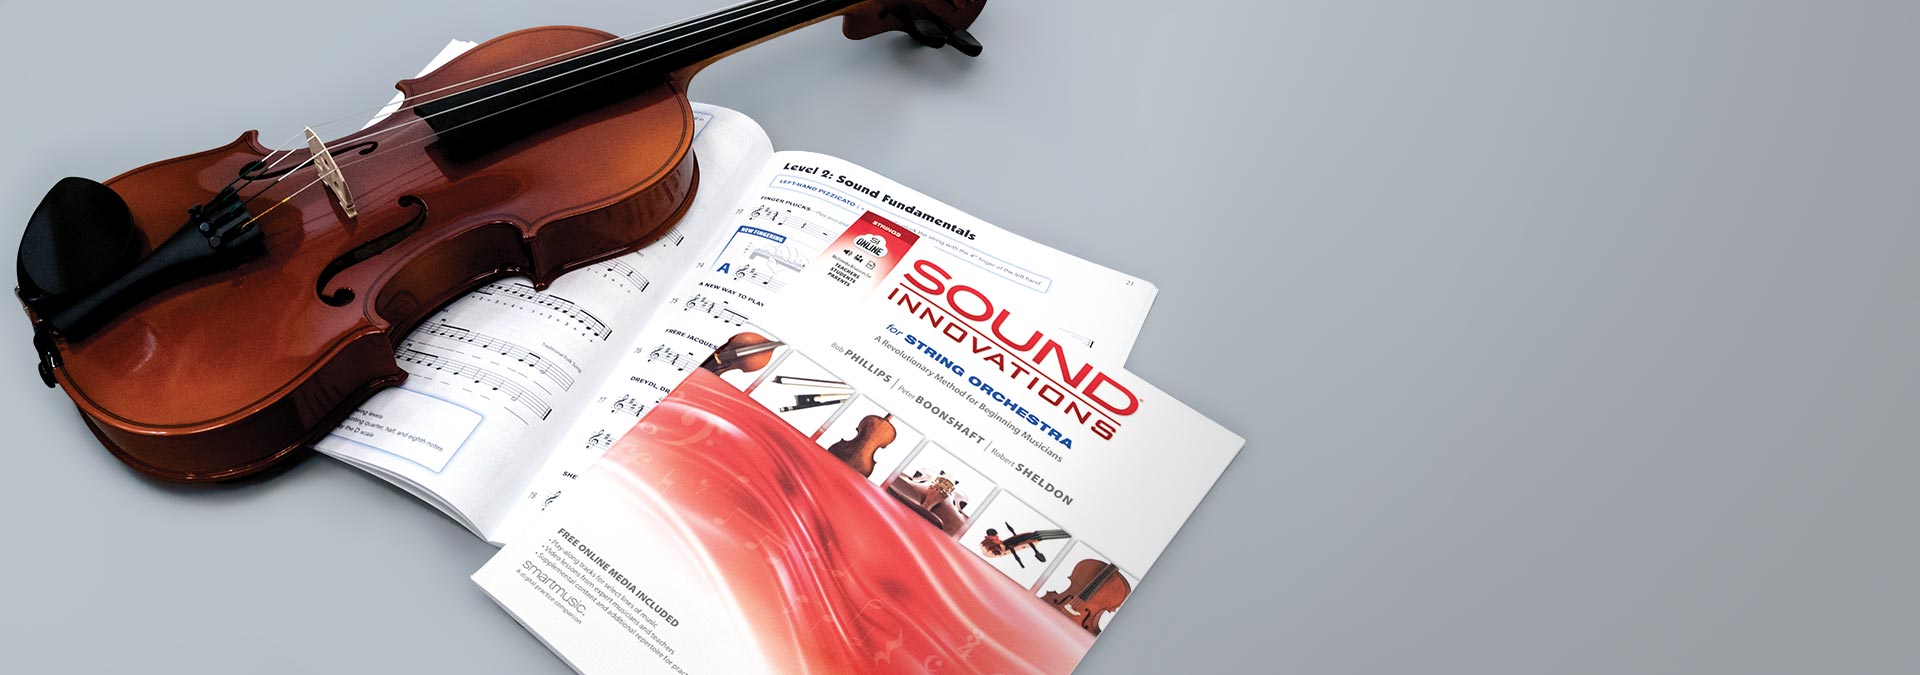 Sound Innovations for&nbsp;String&nbsp;Orchestra